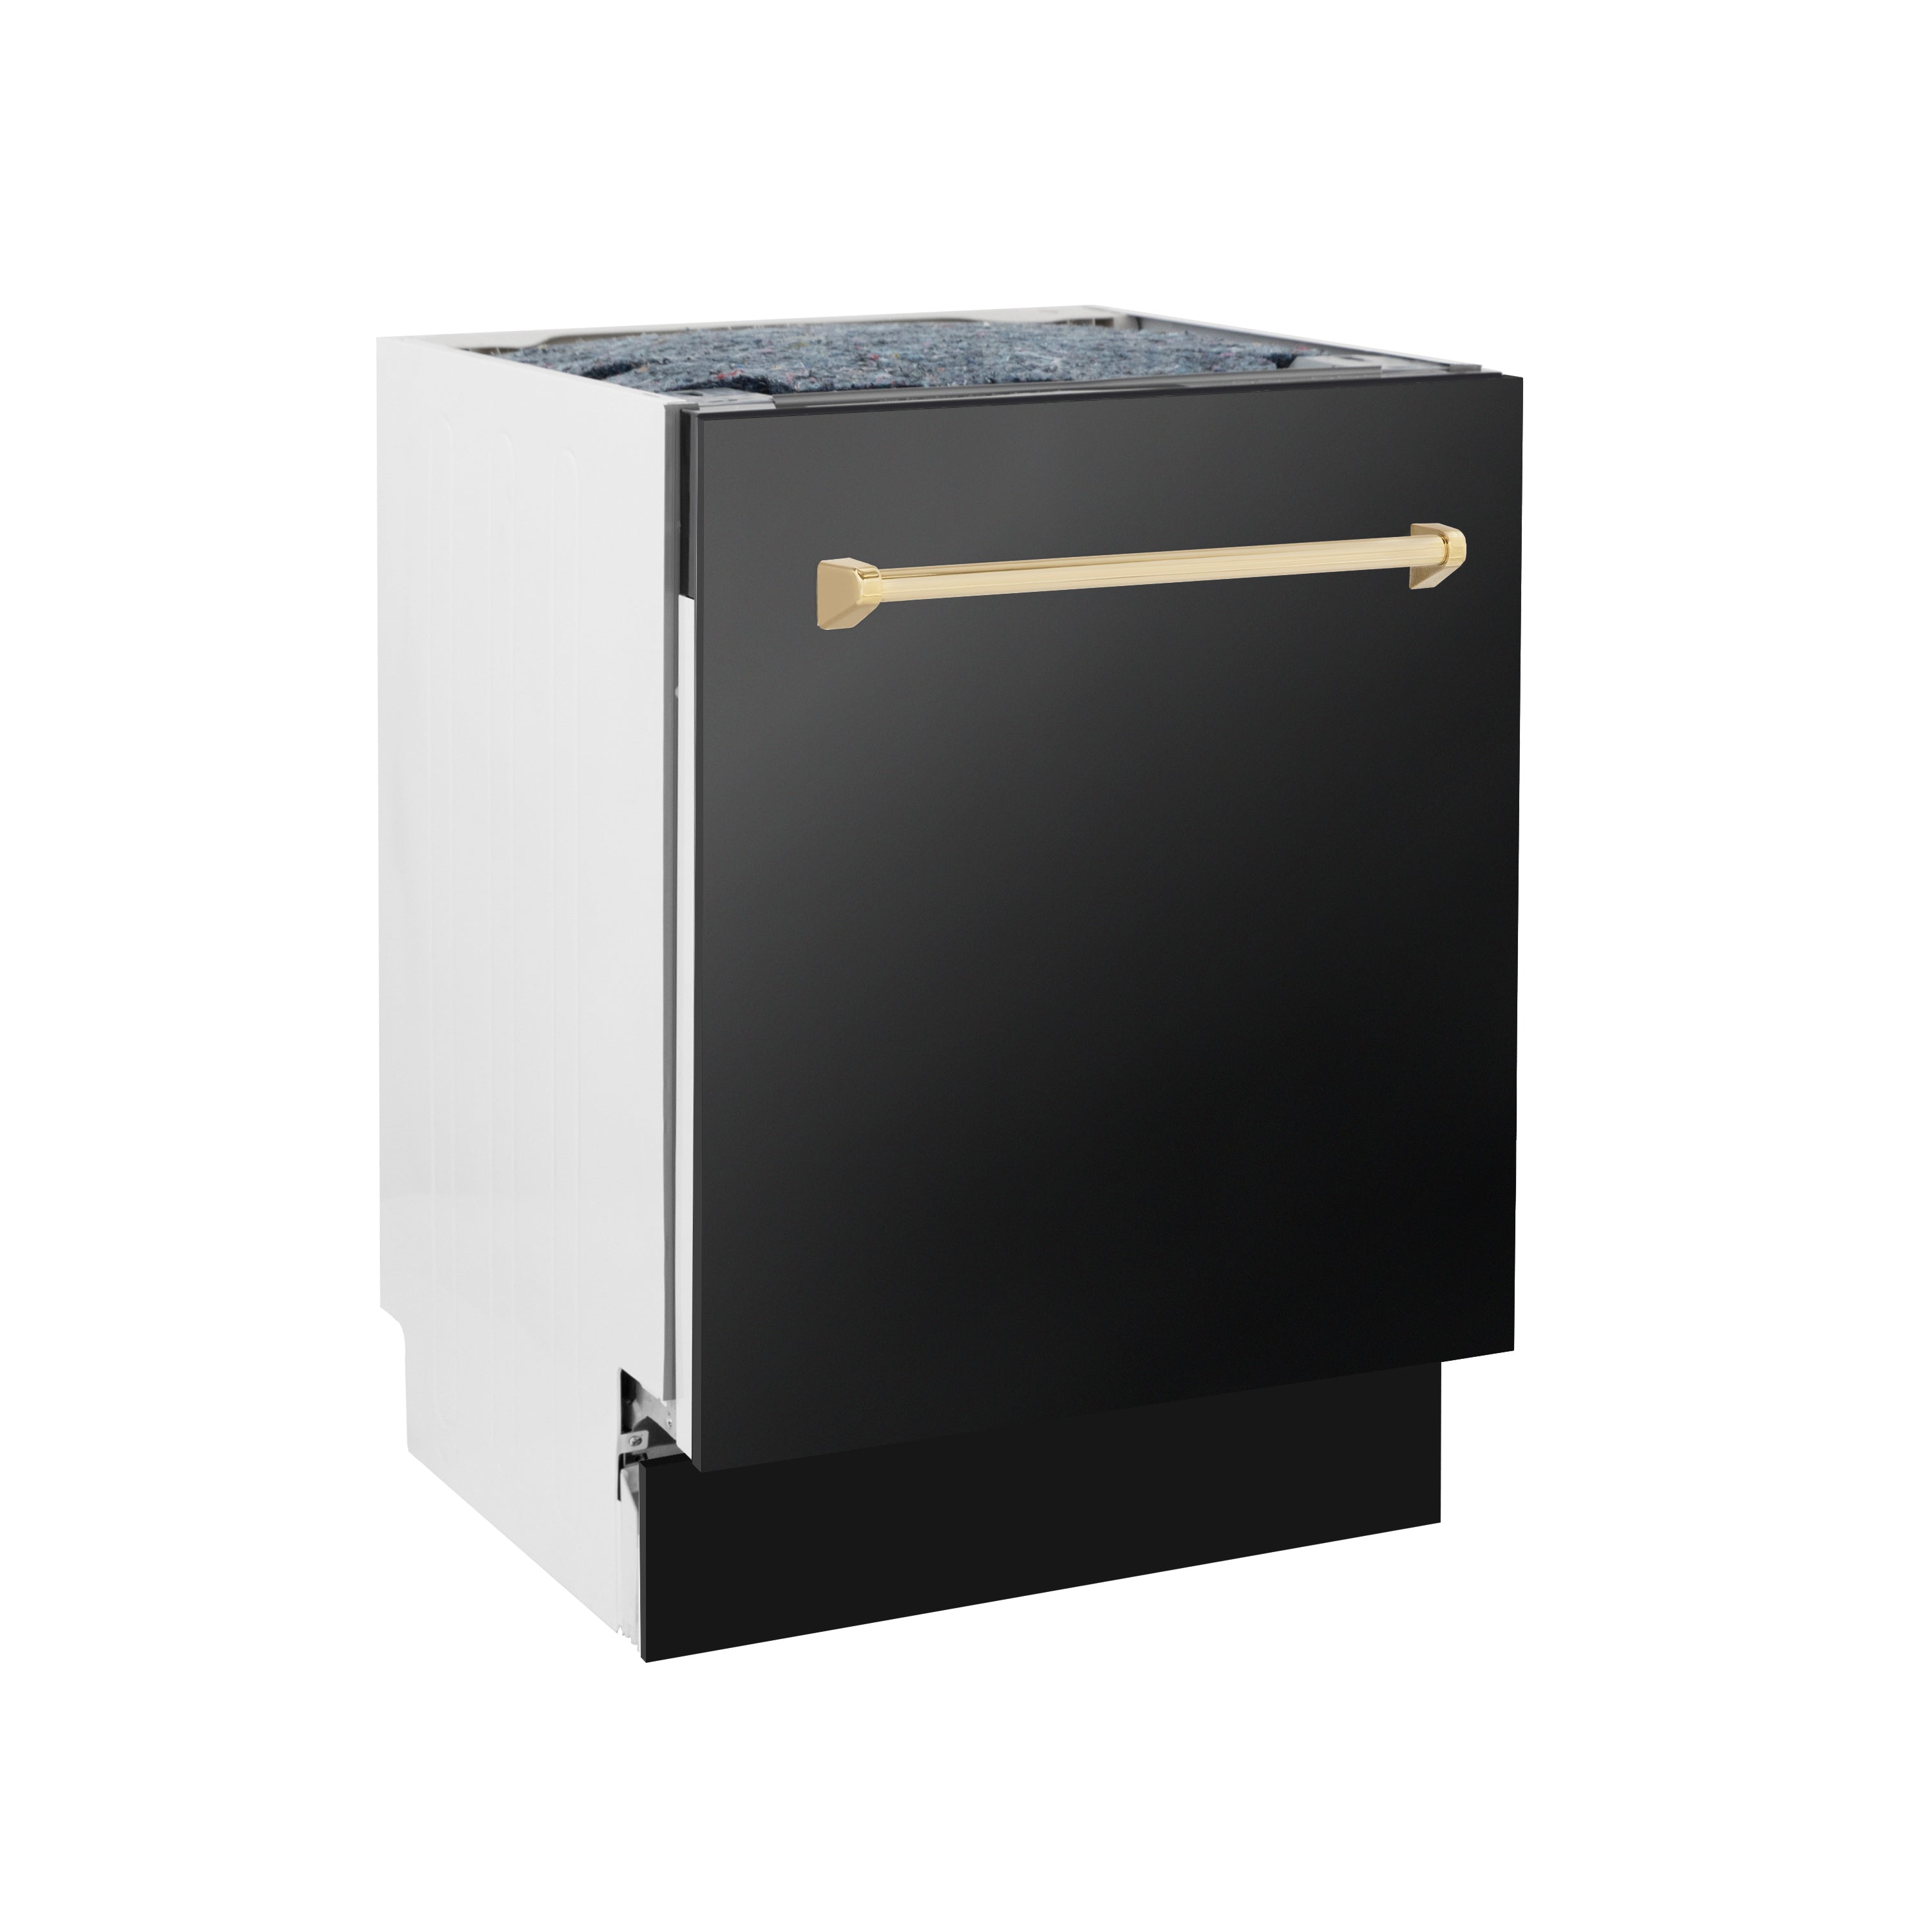 ZLINE Autograph Edition 24" Black Stainless Steel Dishwasher with Polished Gold handle (DWVZ-BS-24-G) side, door closed.